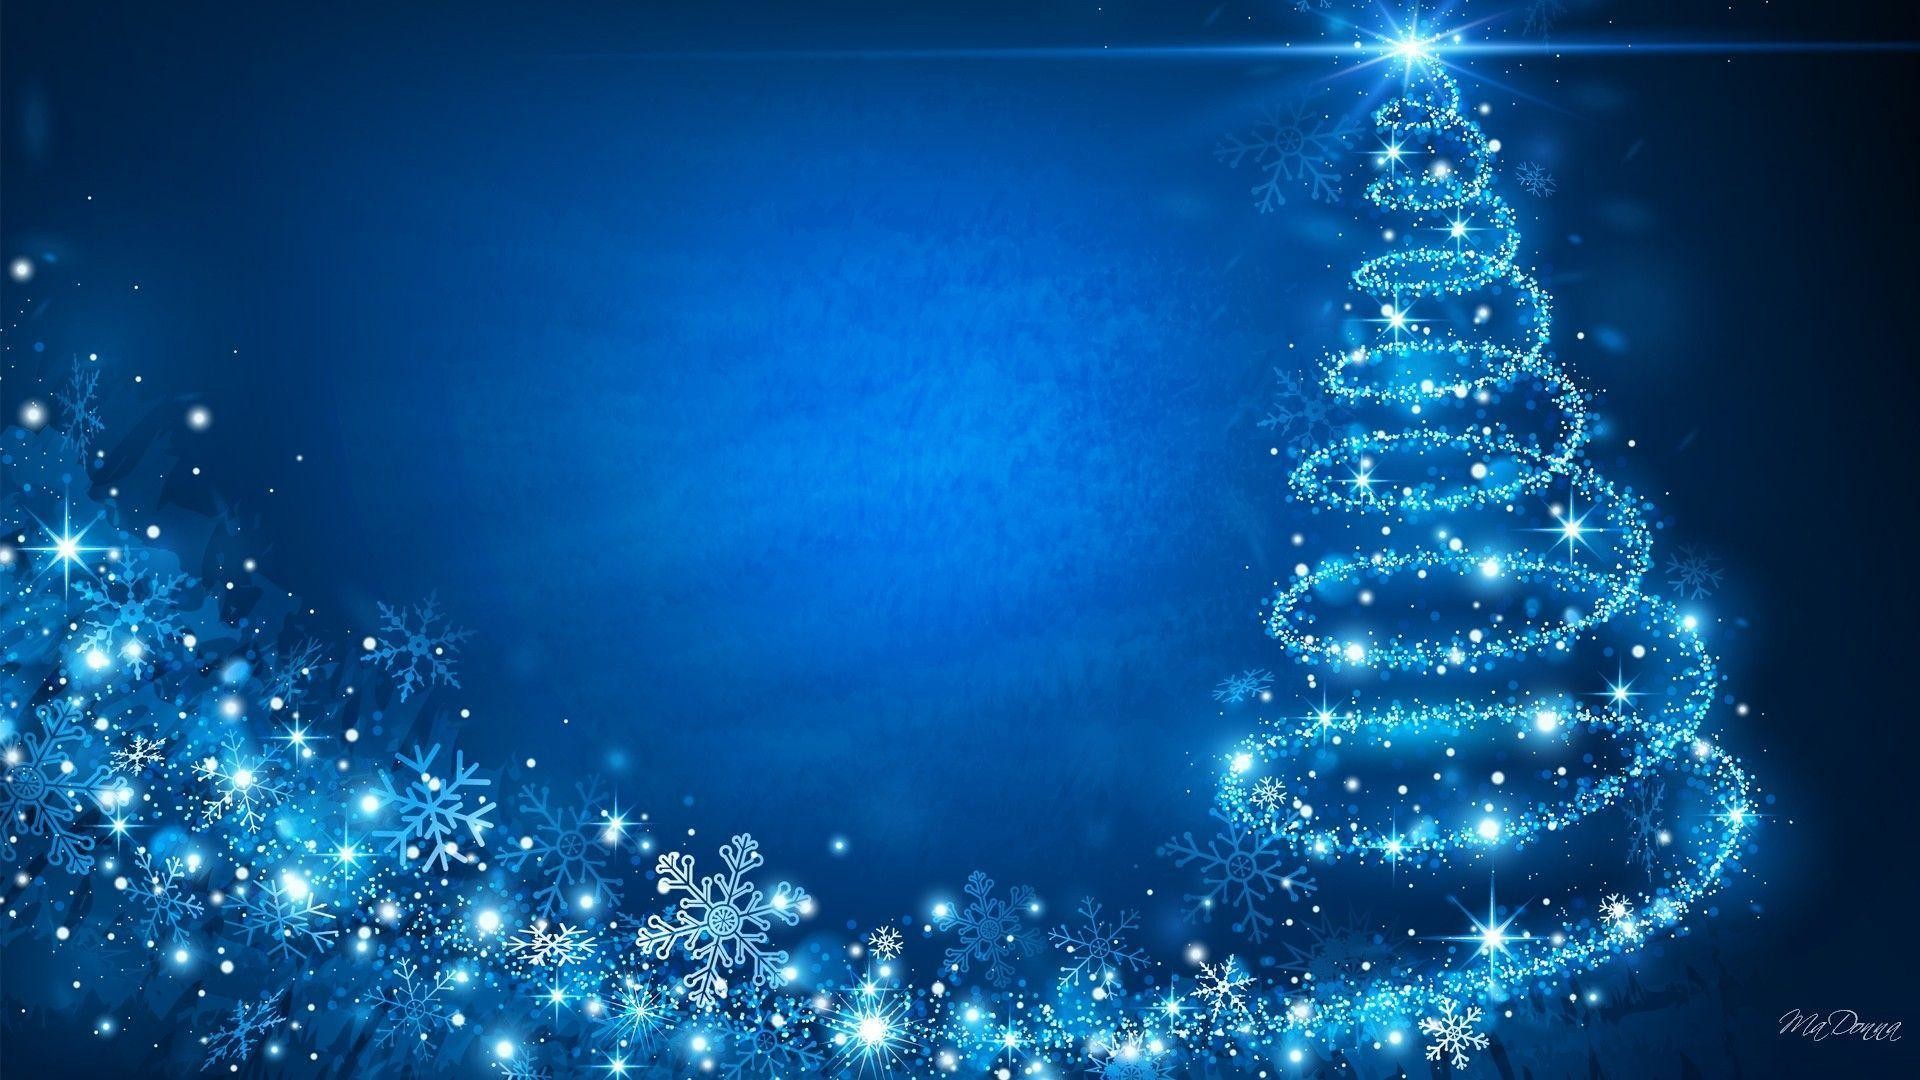 Blue Christmas Wallpaper Pictures